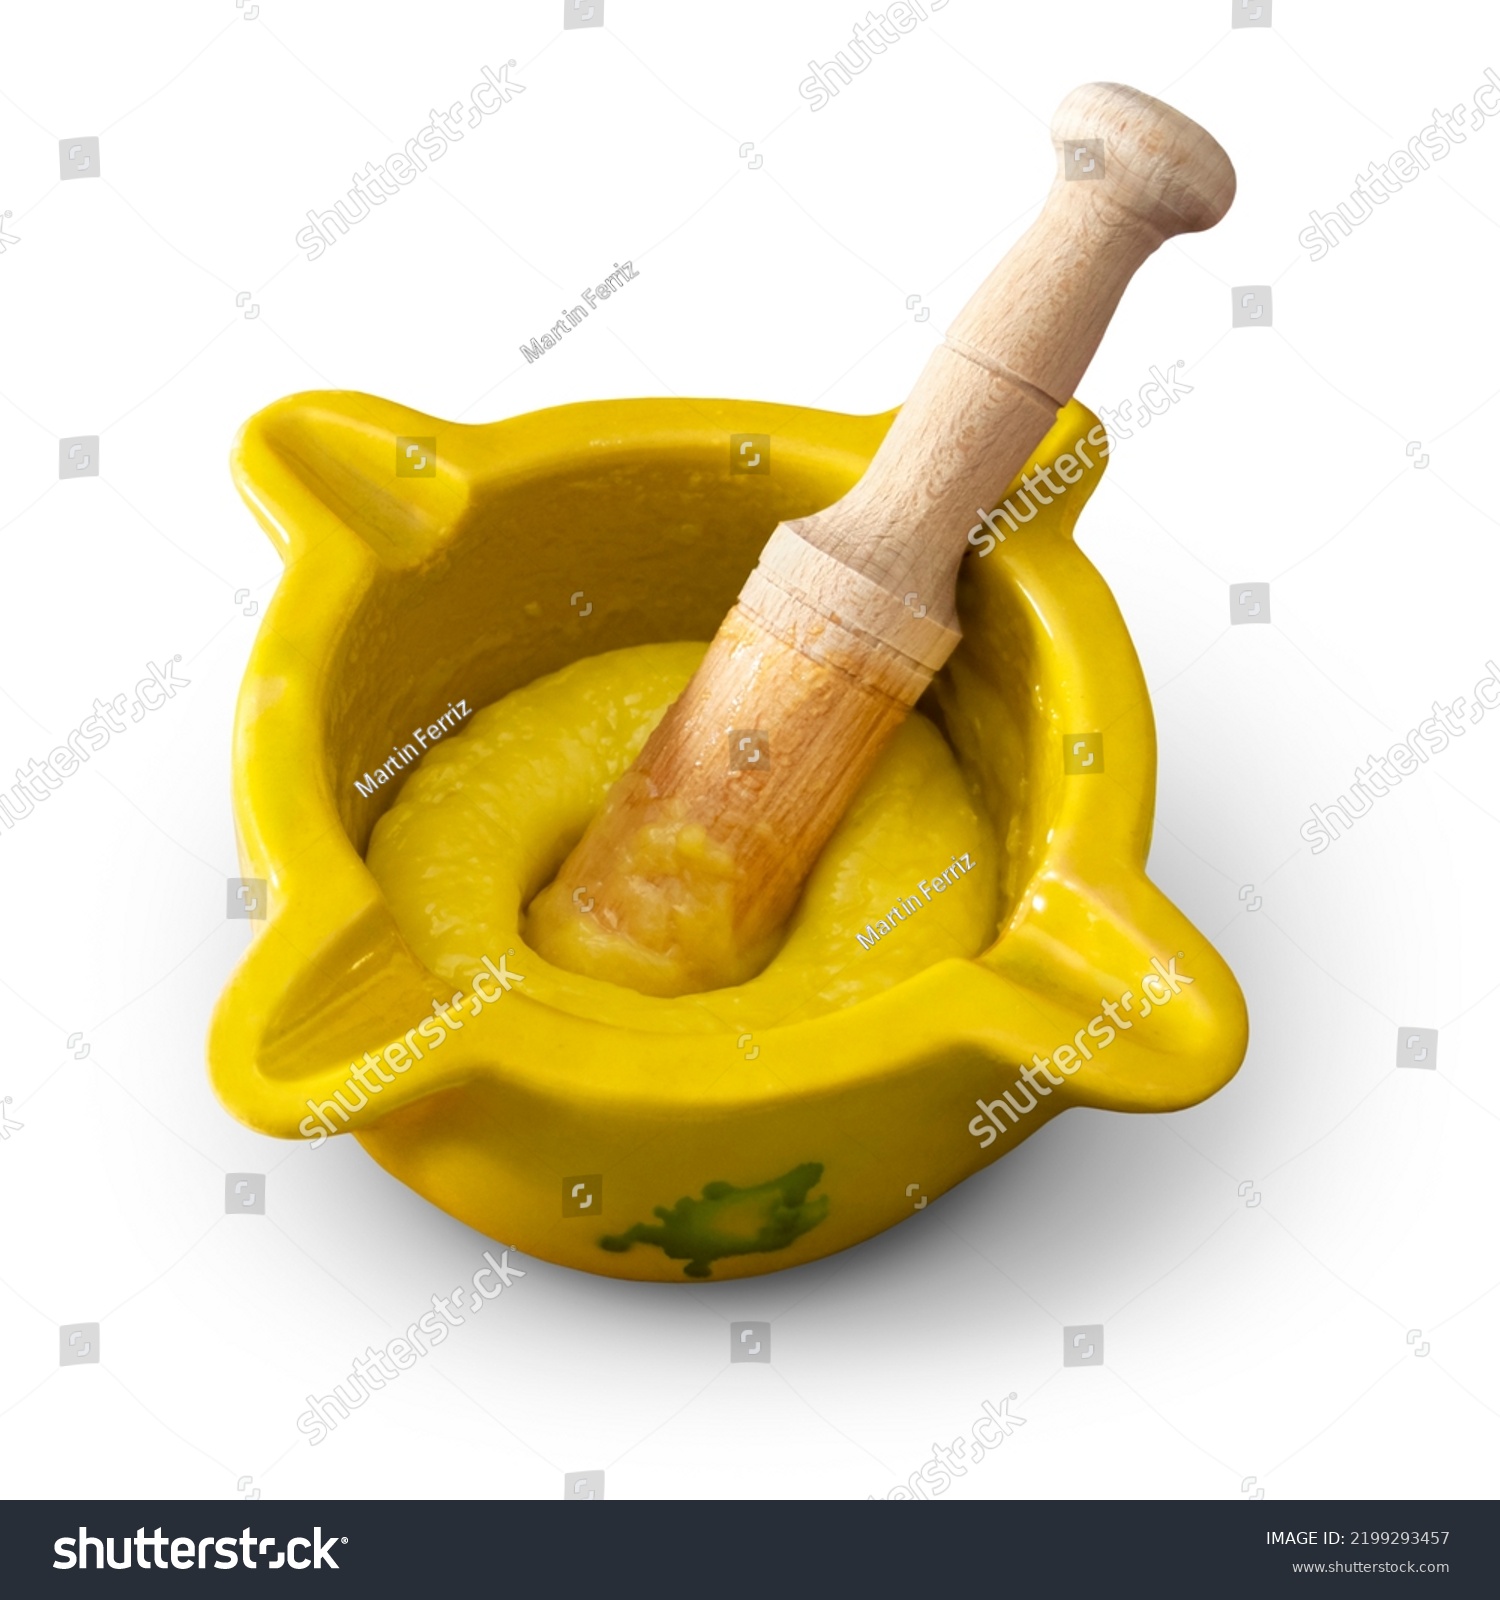 Mortar and pestle with freshly made "alioli" sauce isolated on an empty background #2199293457